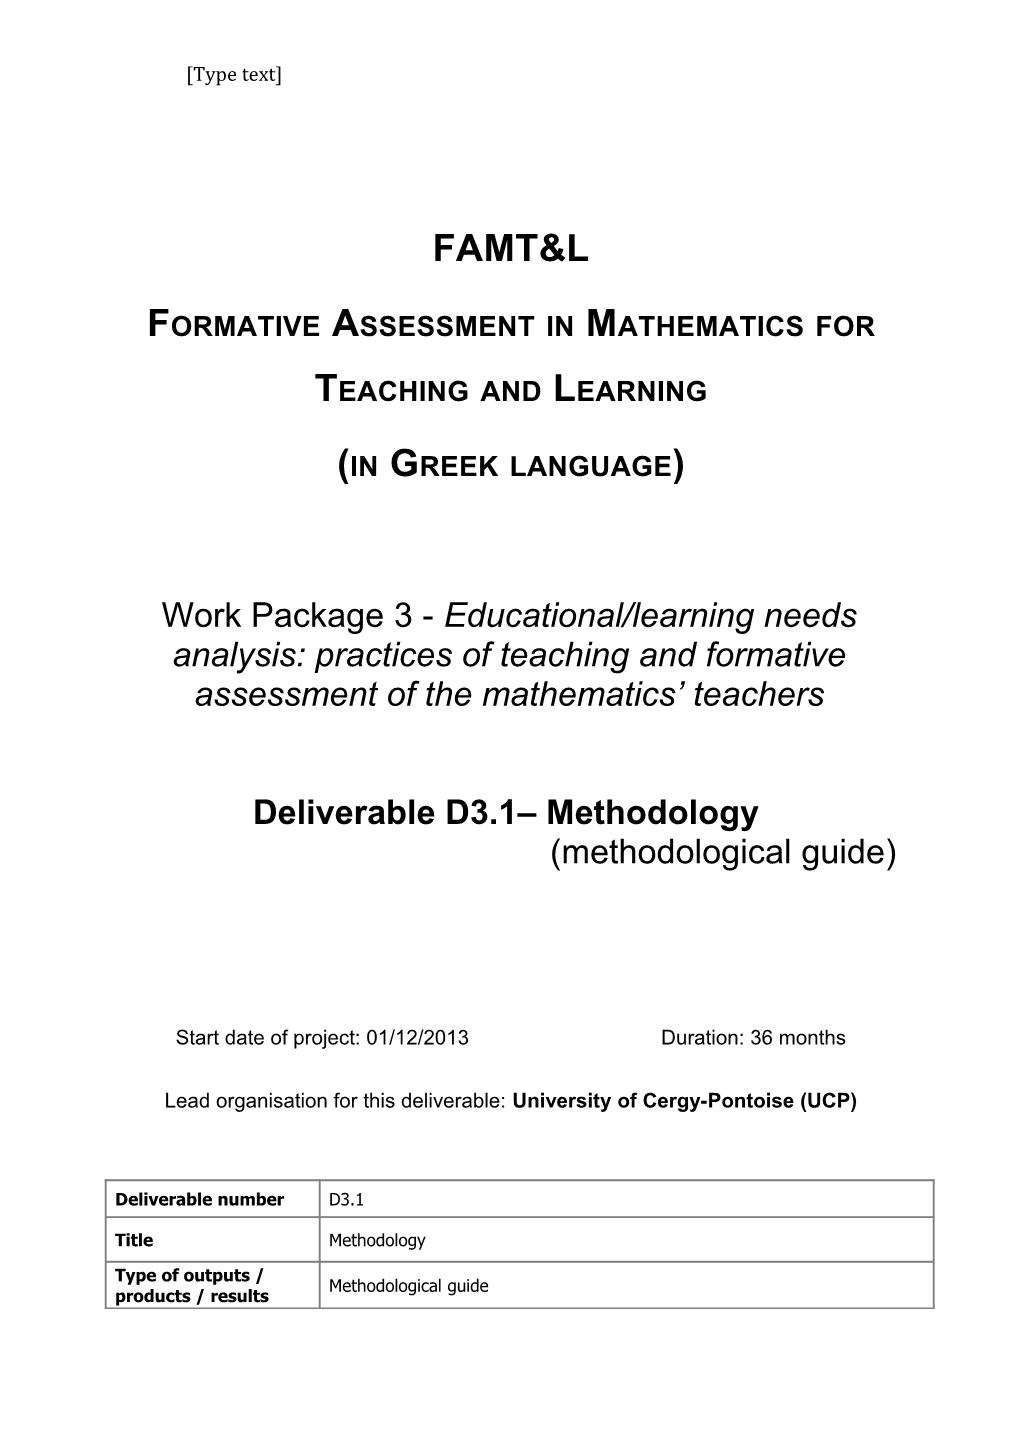 Formative Assessment in Mathematics for Teaching and Learning